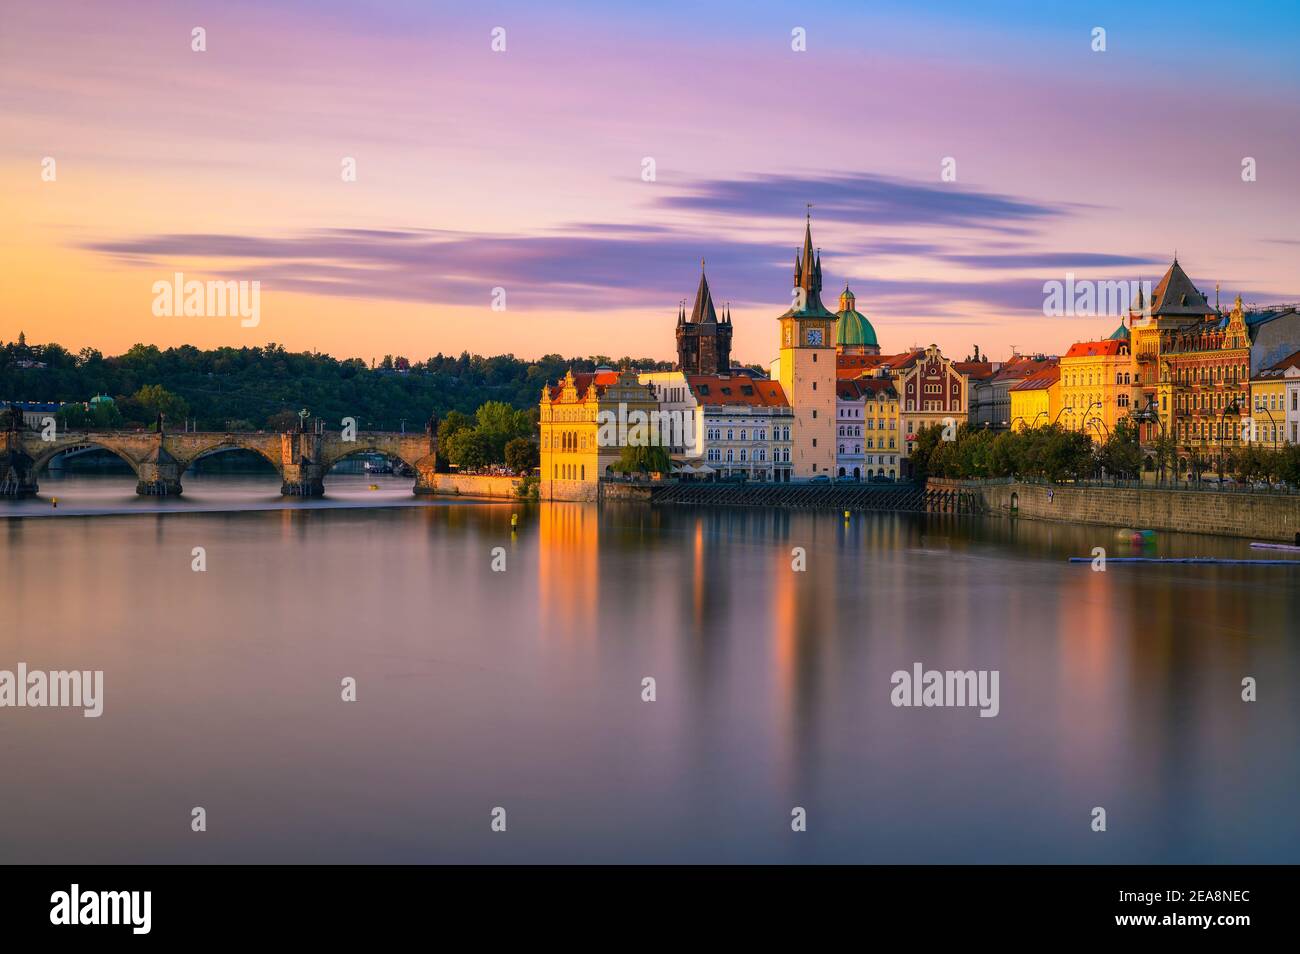 Charles bridge and the old town of Prague at sunset Stock Photo